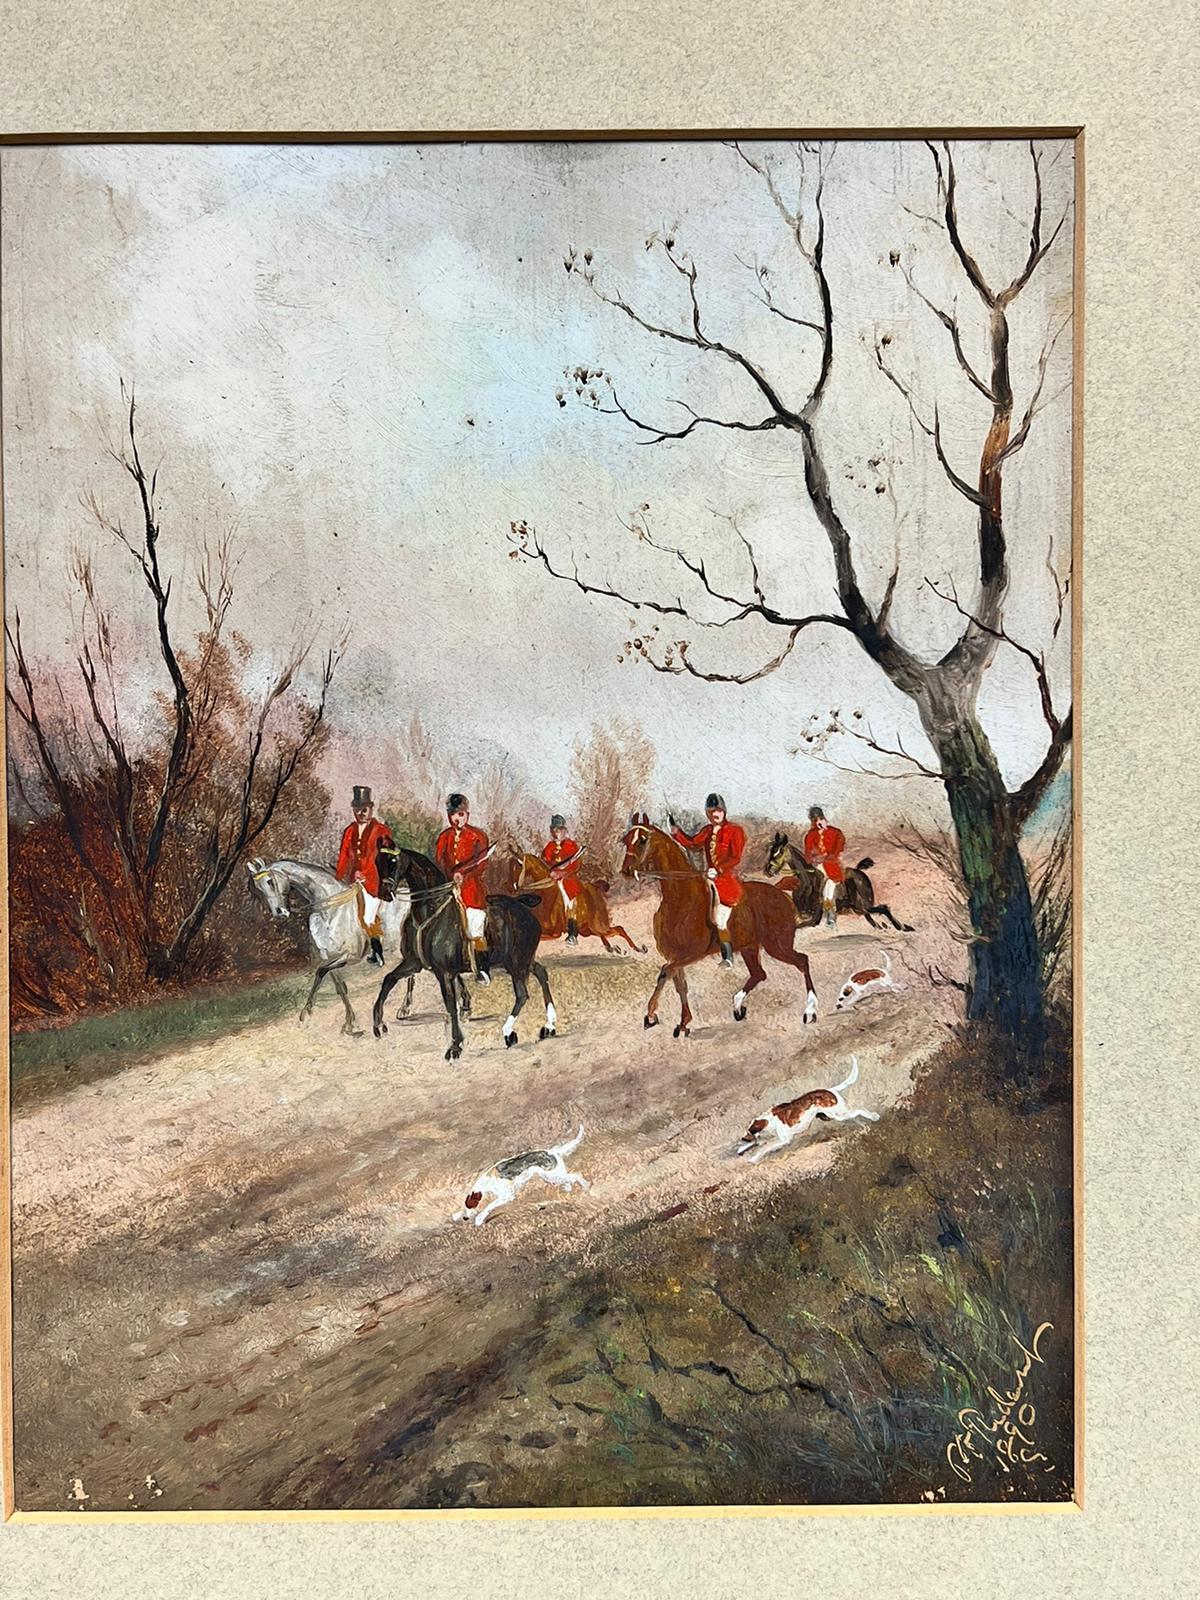 Superb oil painting by the very popular English sporting artist, Philip Rideout (circa 1850-1920). 

signed oil on paper mounted in a frame
dated
framed: 16 x 14 inches
paper: 10.5 x 8 inches

Rideout is one of Englands most popular sporting artists